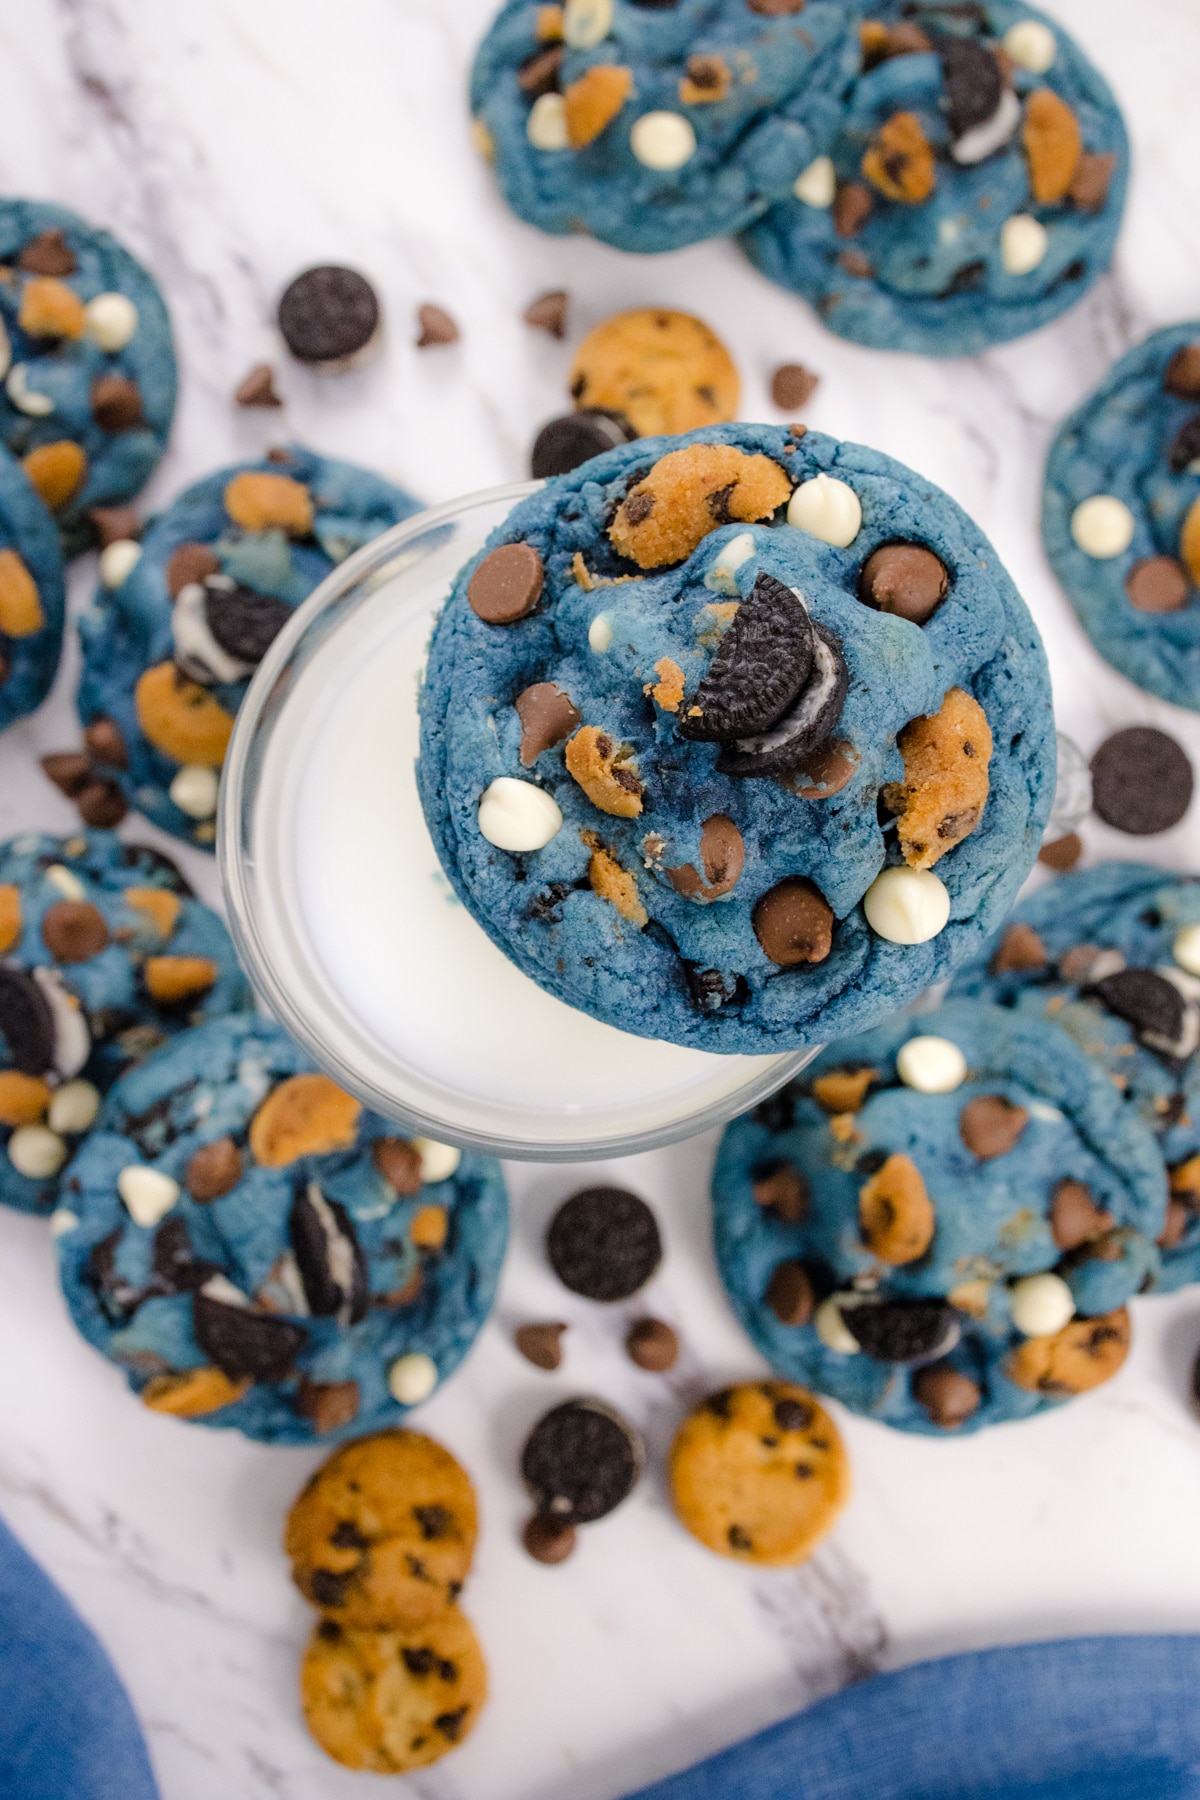 Top view of a cookie monster cookie sitting on the edge of a glass of milk, surrounded by more cookie monster cookies.